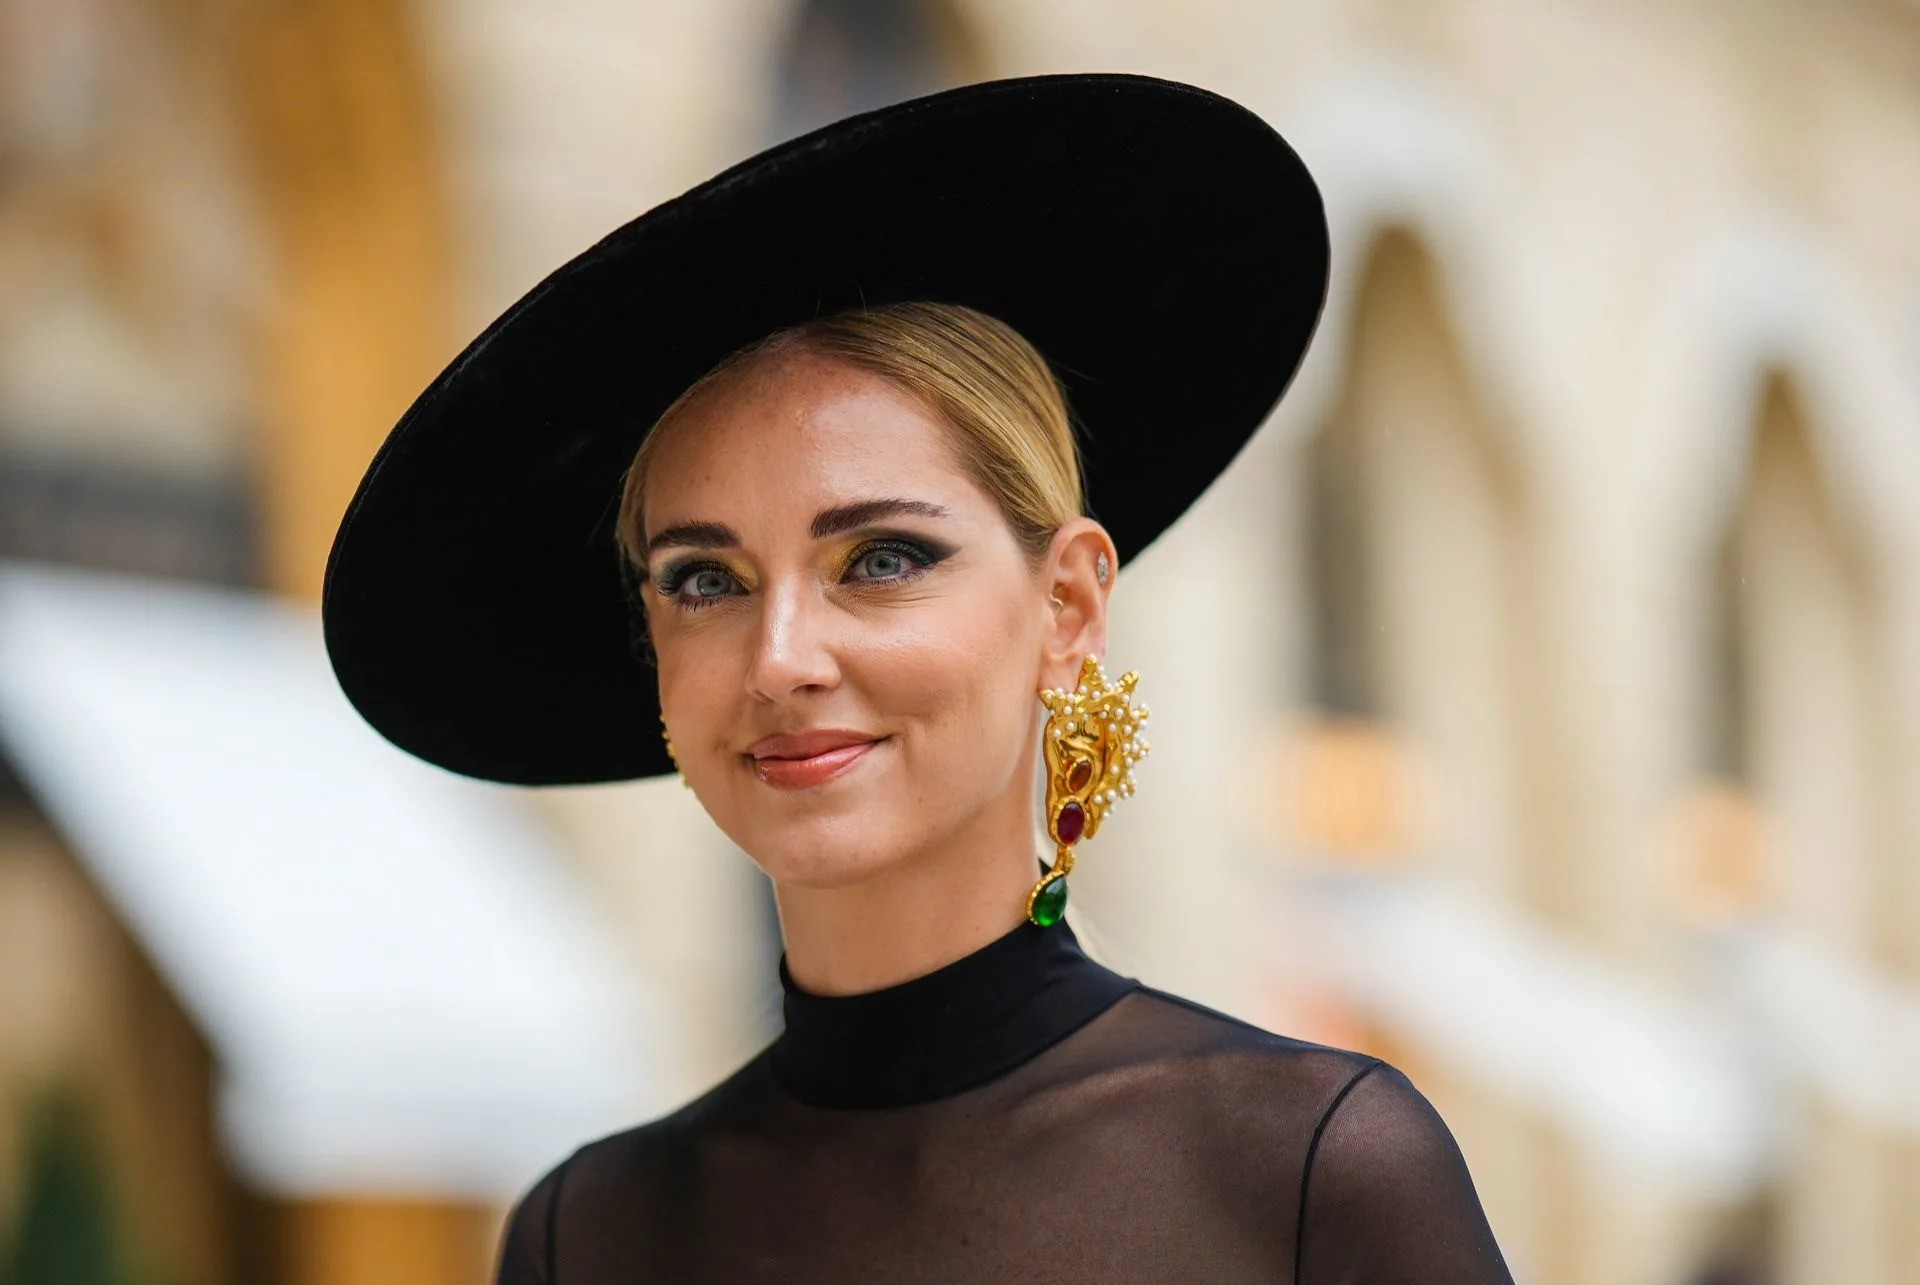 8 Intriguing Facts About Chiara Ferragni - Facts.net